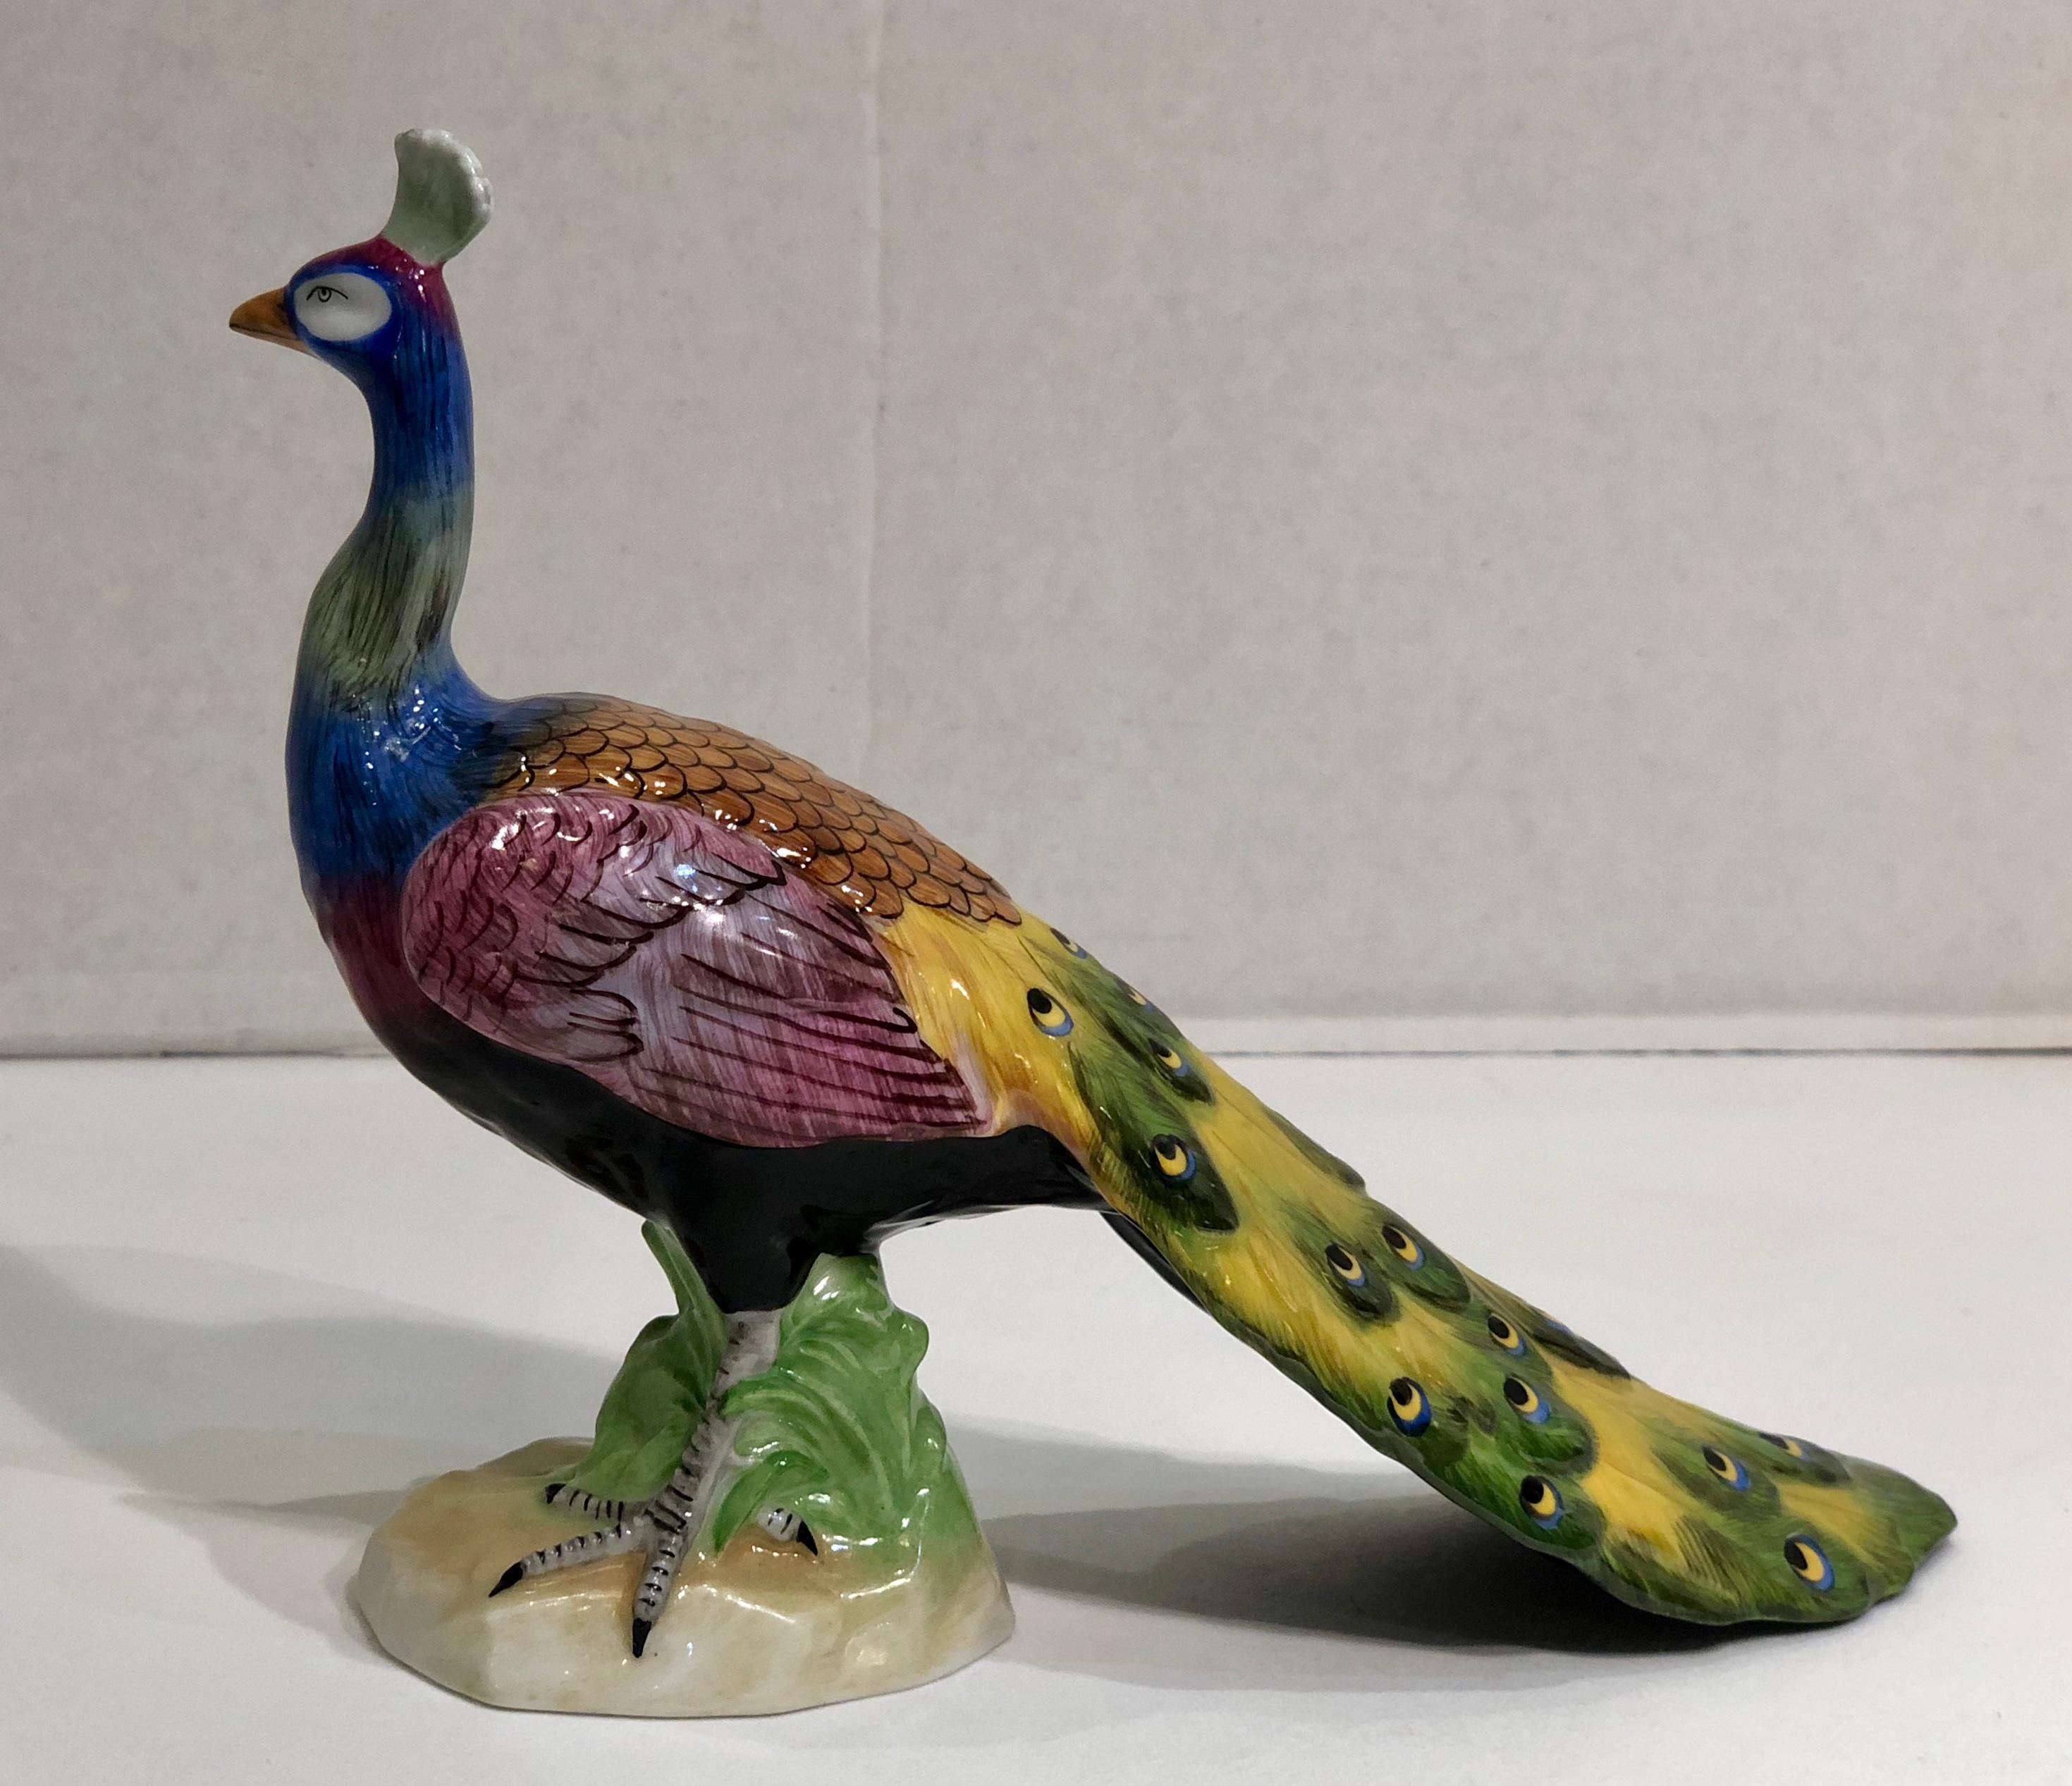 Exquisite Dresden Porcelain Peacock Tail Closed Facing Forward Figurine Germany For Sale 1